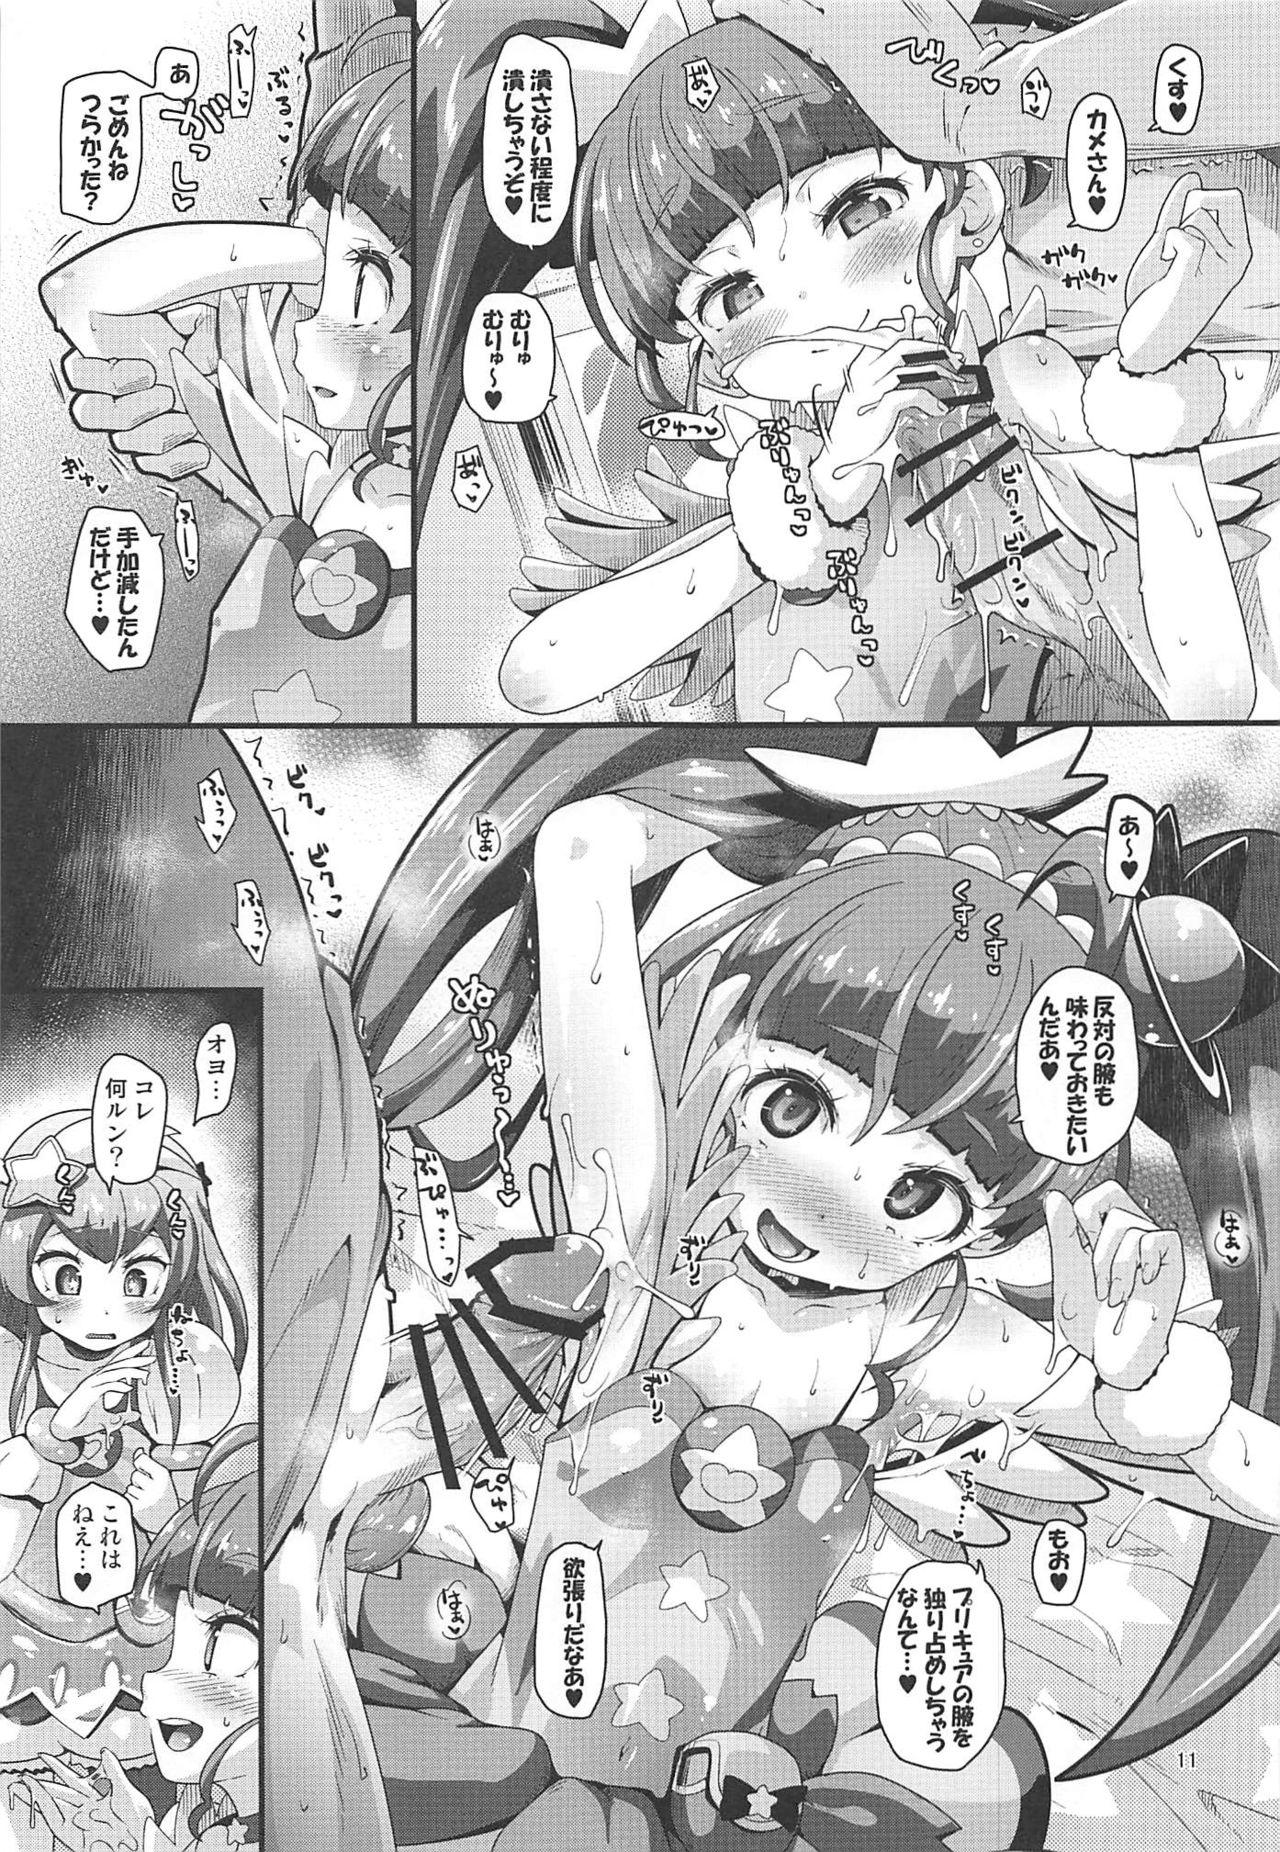 Safadinha Kyousei Kyousei Practice - Star twinkle precure Crazy - Page 10